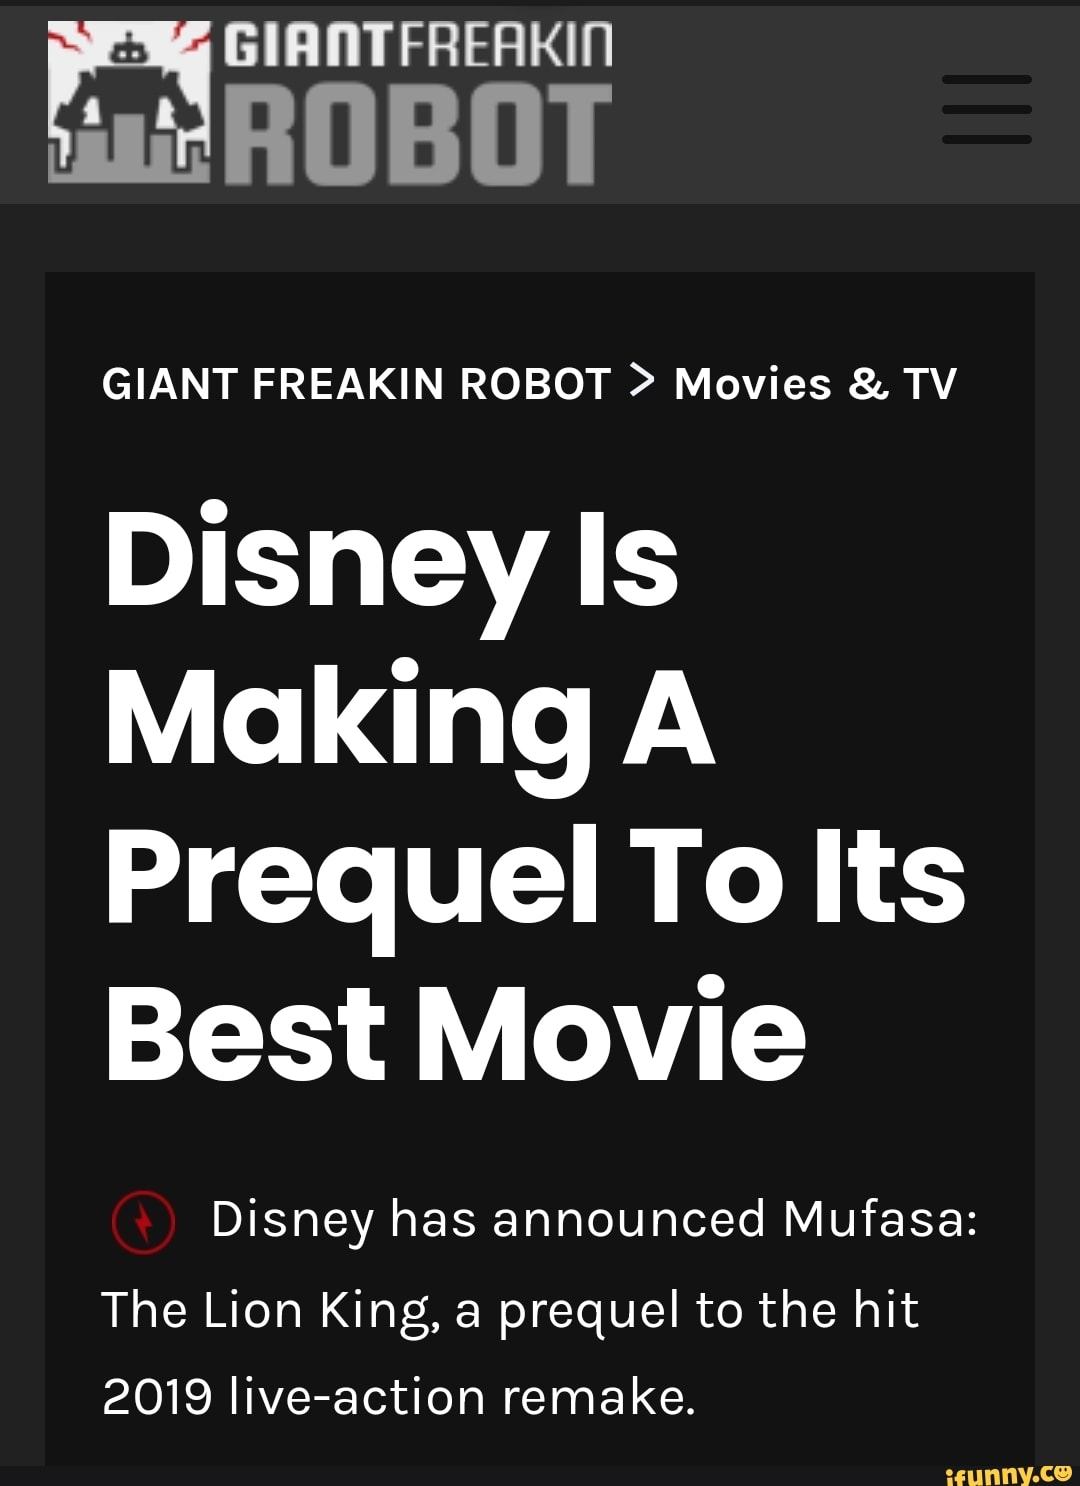 Giantfreakin Robot Giant Freakin Robot Movies And Tv Disney Is Making A Prequel To Its Best